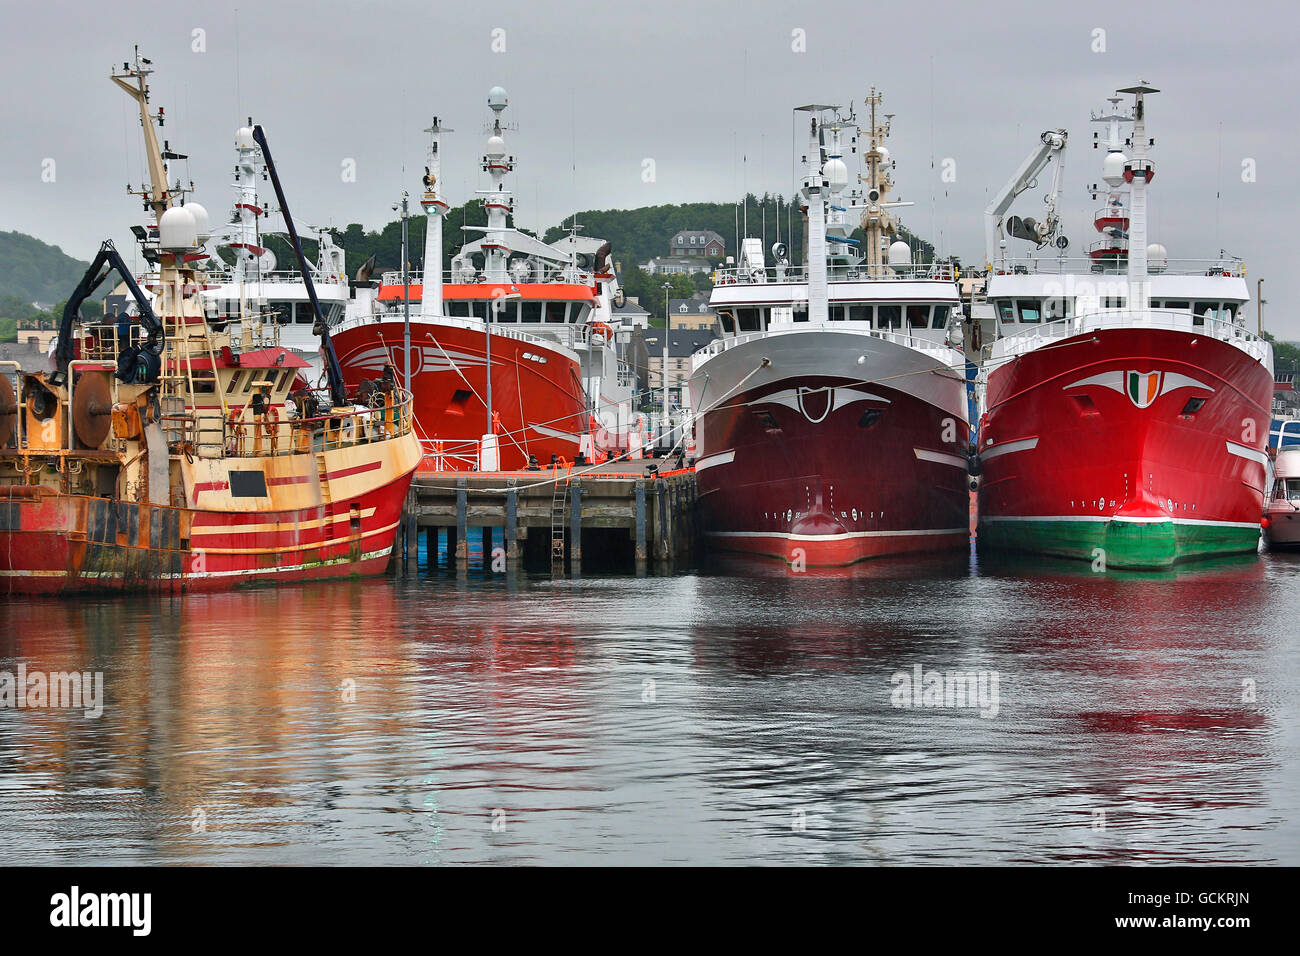 Commercial fishing trawlers moored in docks at Killybegs in County Donegal in the Republic of Ireland Stock Photo